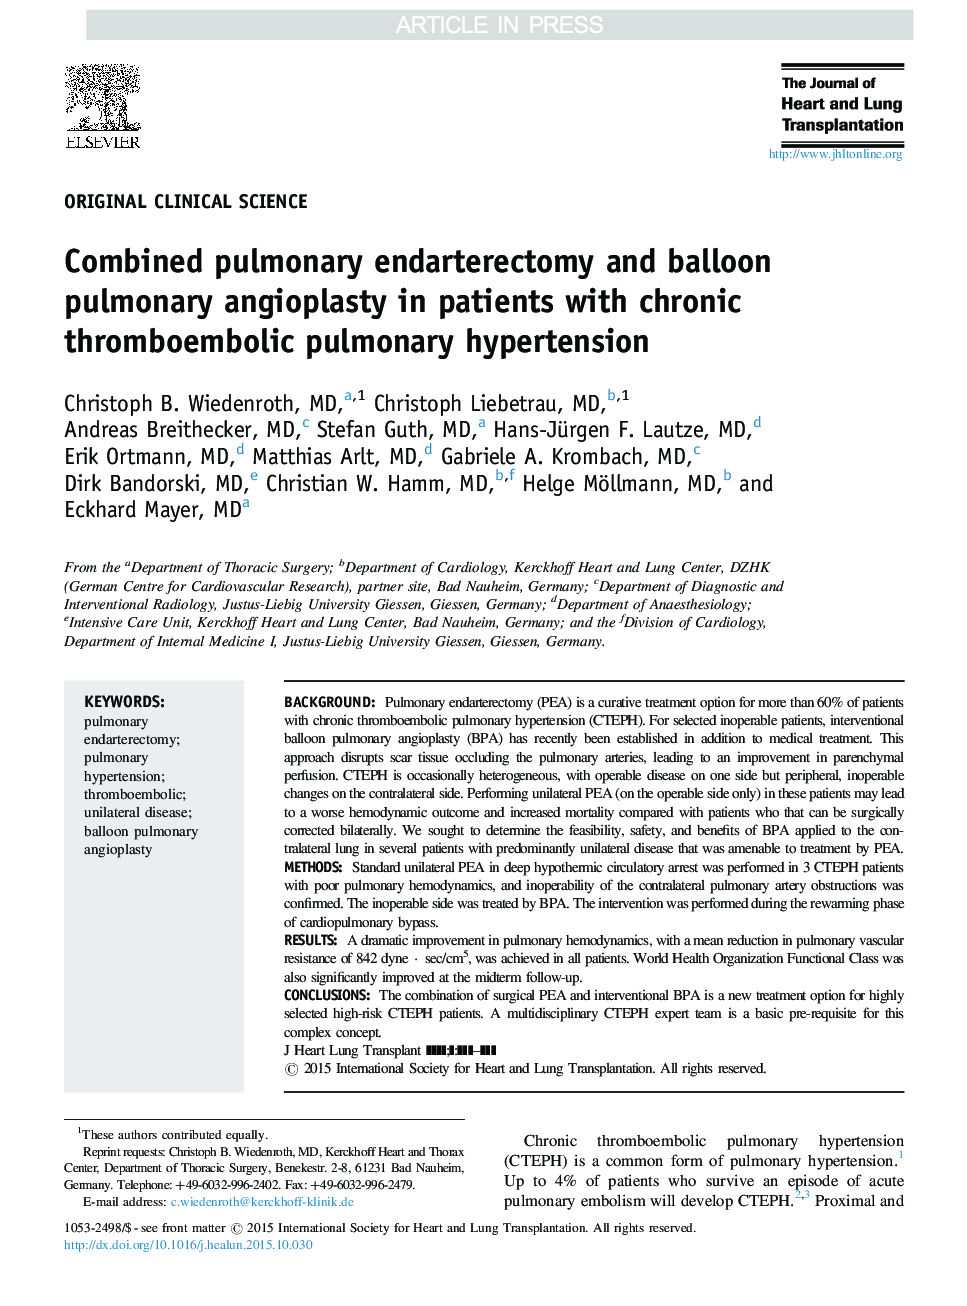 Combined pulmonary endarterectomy and balloon pulmonary angioplasty in patients with chronic thromboembolic pulmonary hypertension